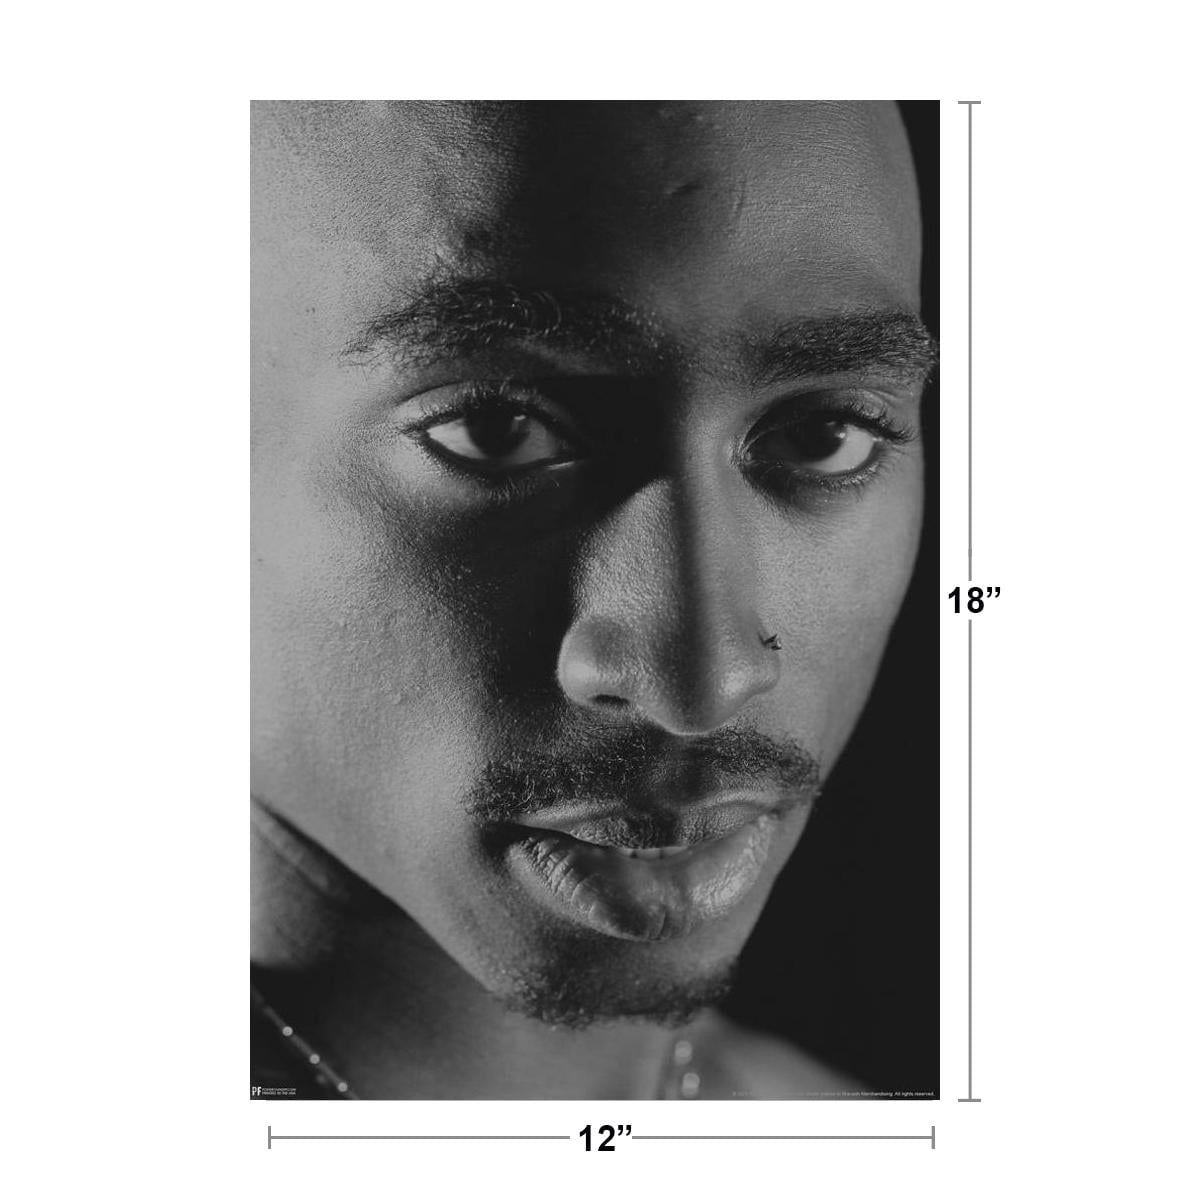 Tupac Posters 2Pac Poster Close Up Black and White 90s Hip Hop